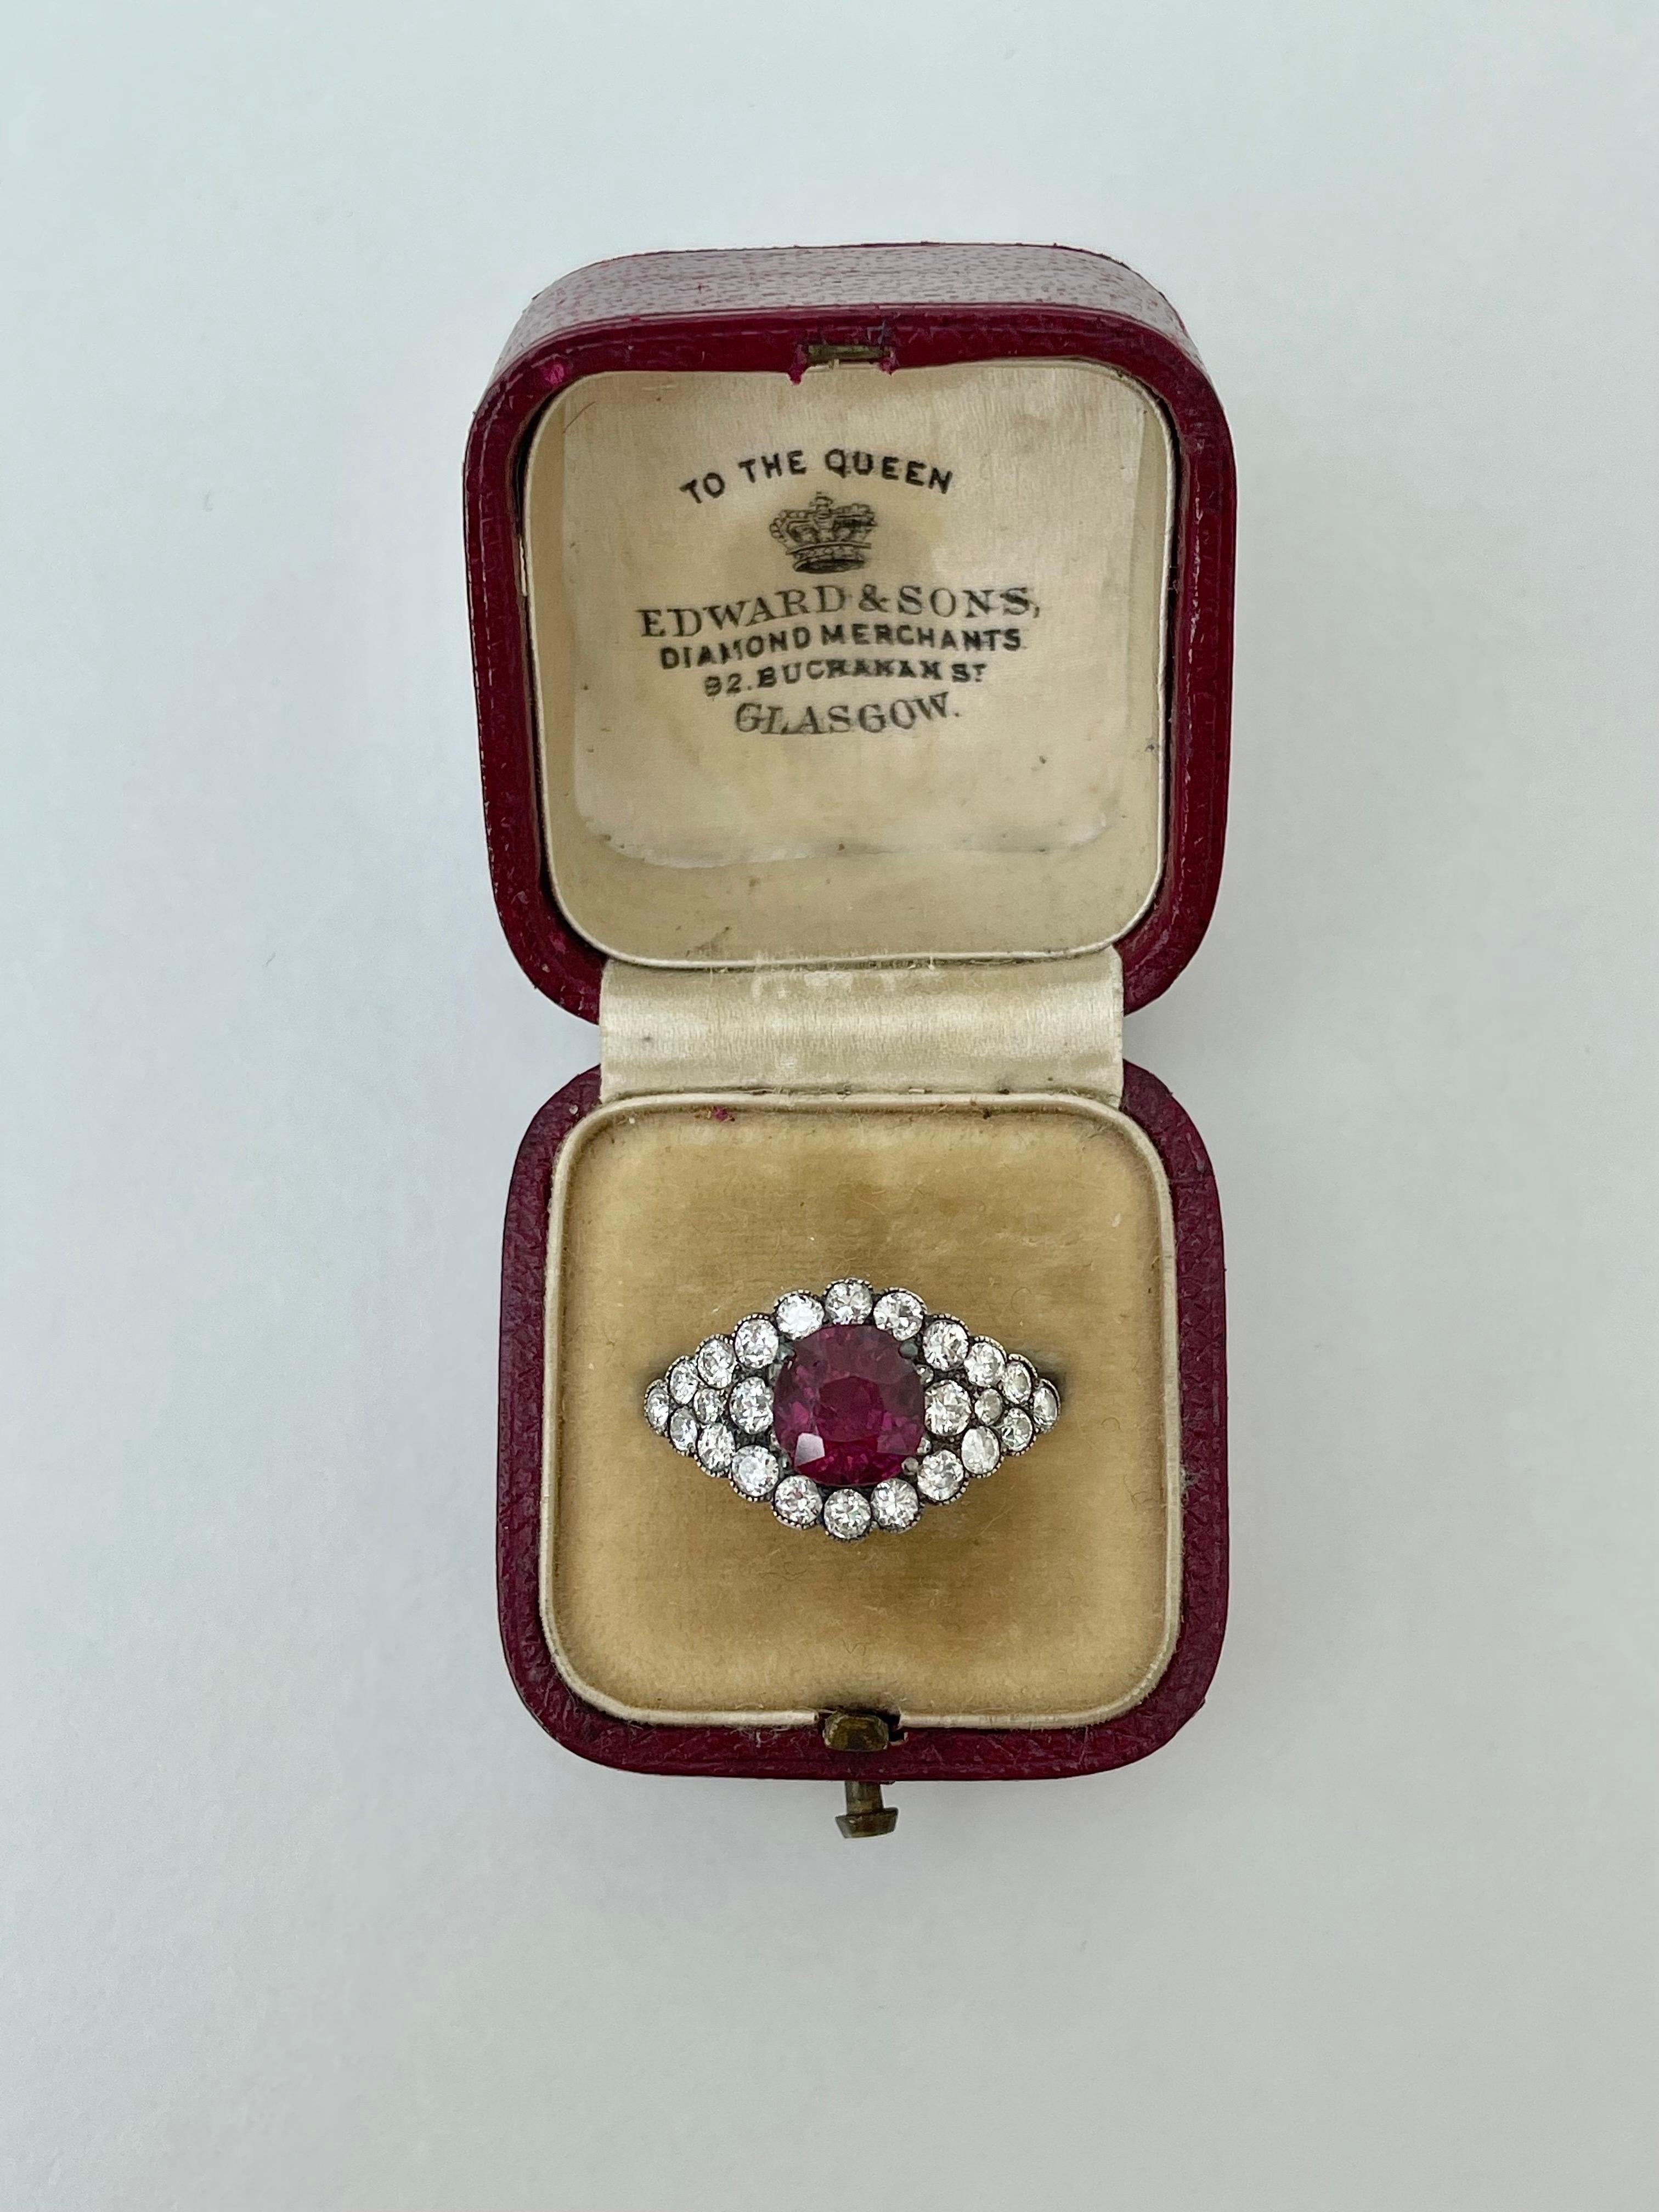 Outstanding Boxed Natural Unheated Ruby and Diamond Ring C.1910

Ruby stone 7.5 x 6.9 x 5.4mm 

truly exquisite centre natural unheated ruby stone surrounded by diamonds, incredible! complete with certificate.

The item comes with its original